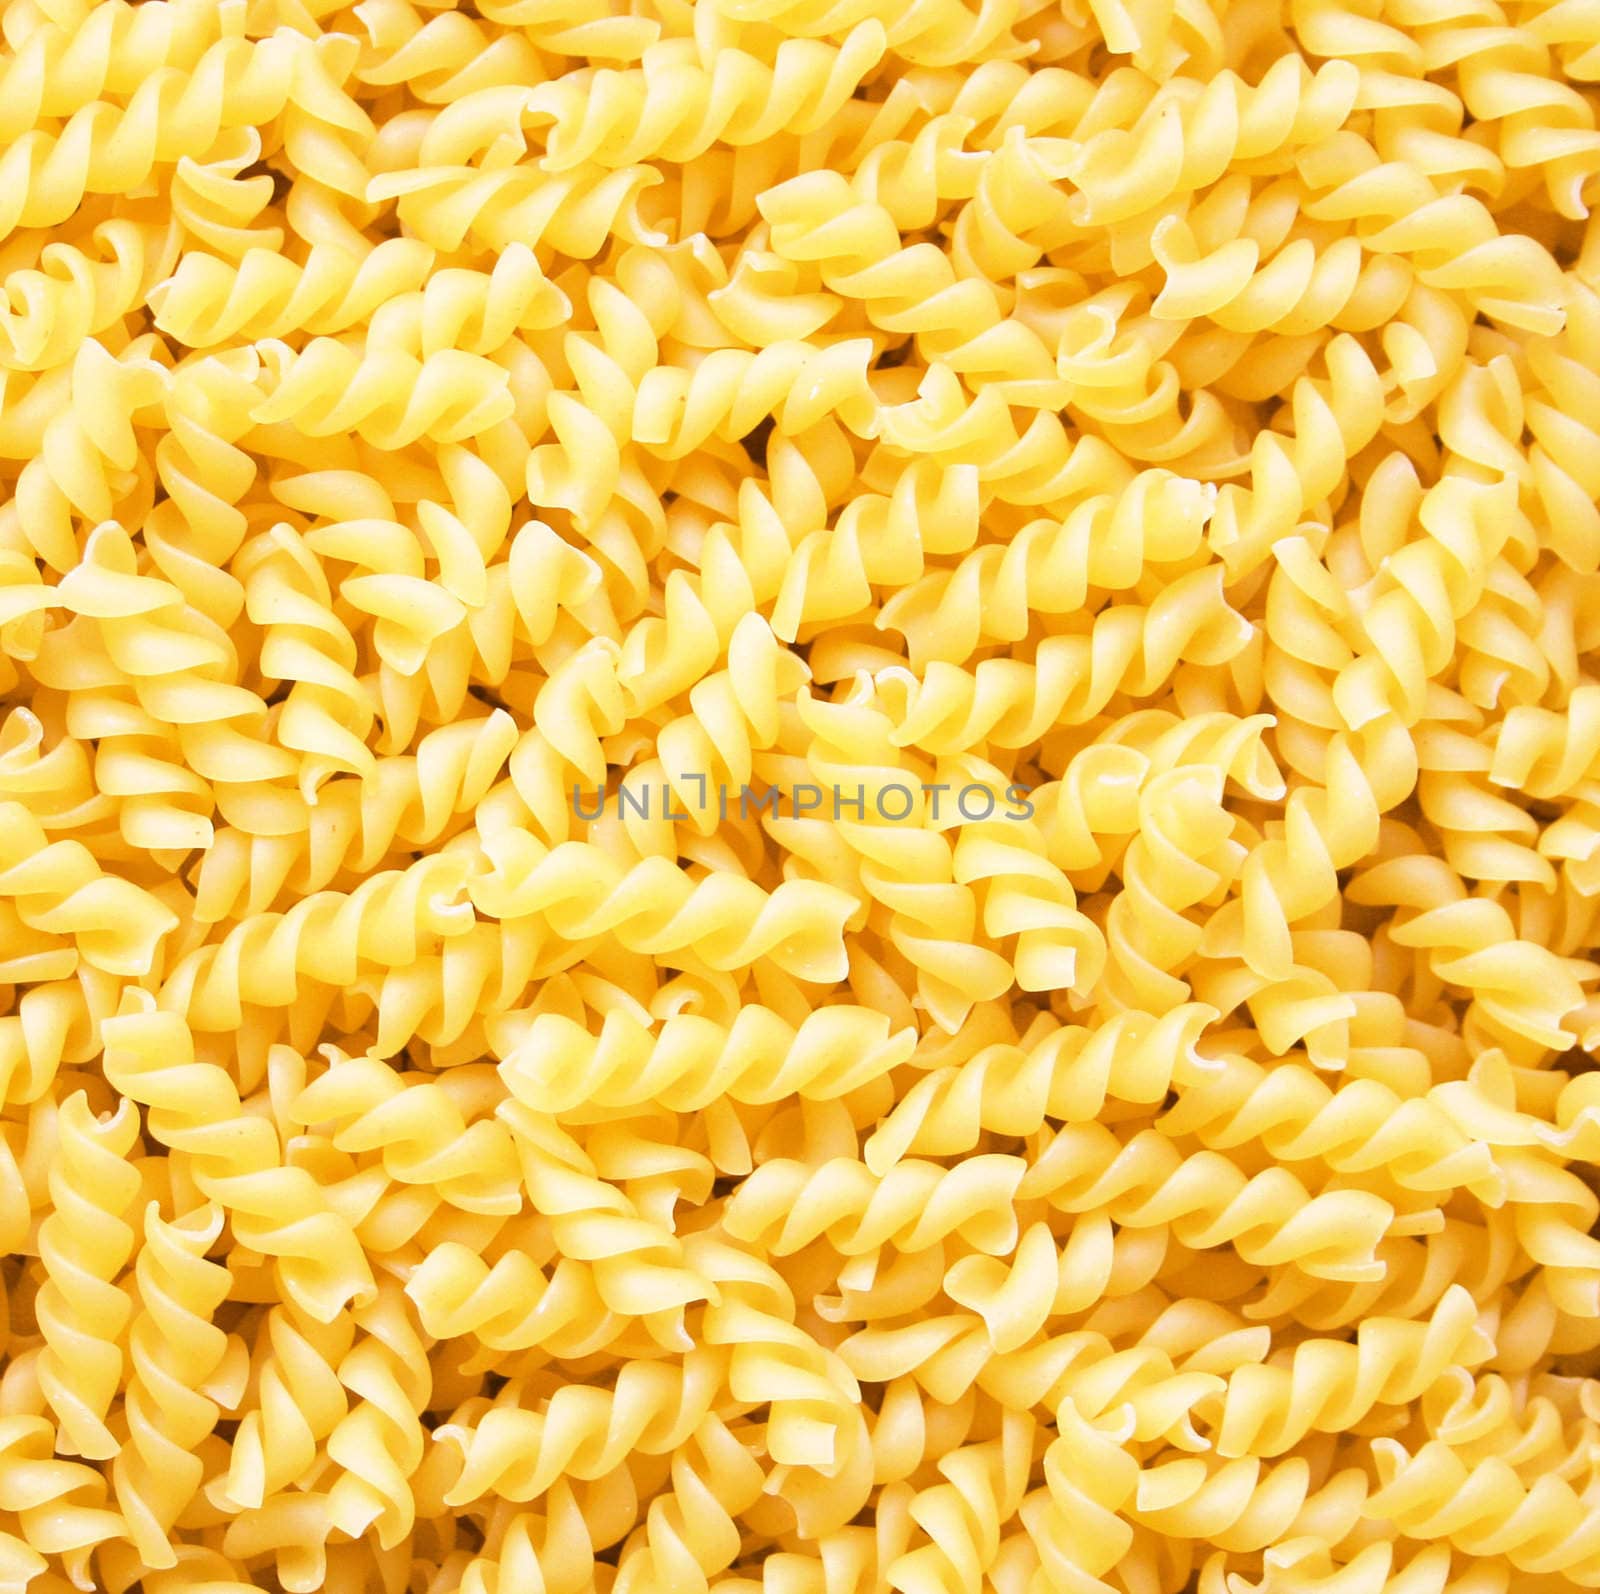 Pasta fusili can use as background